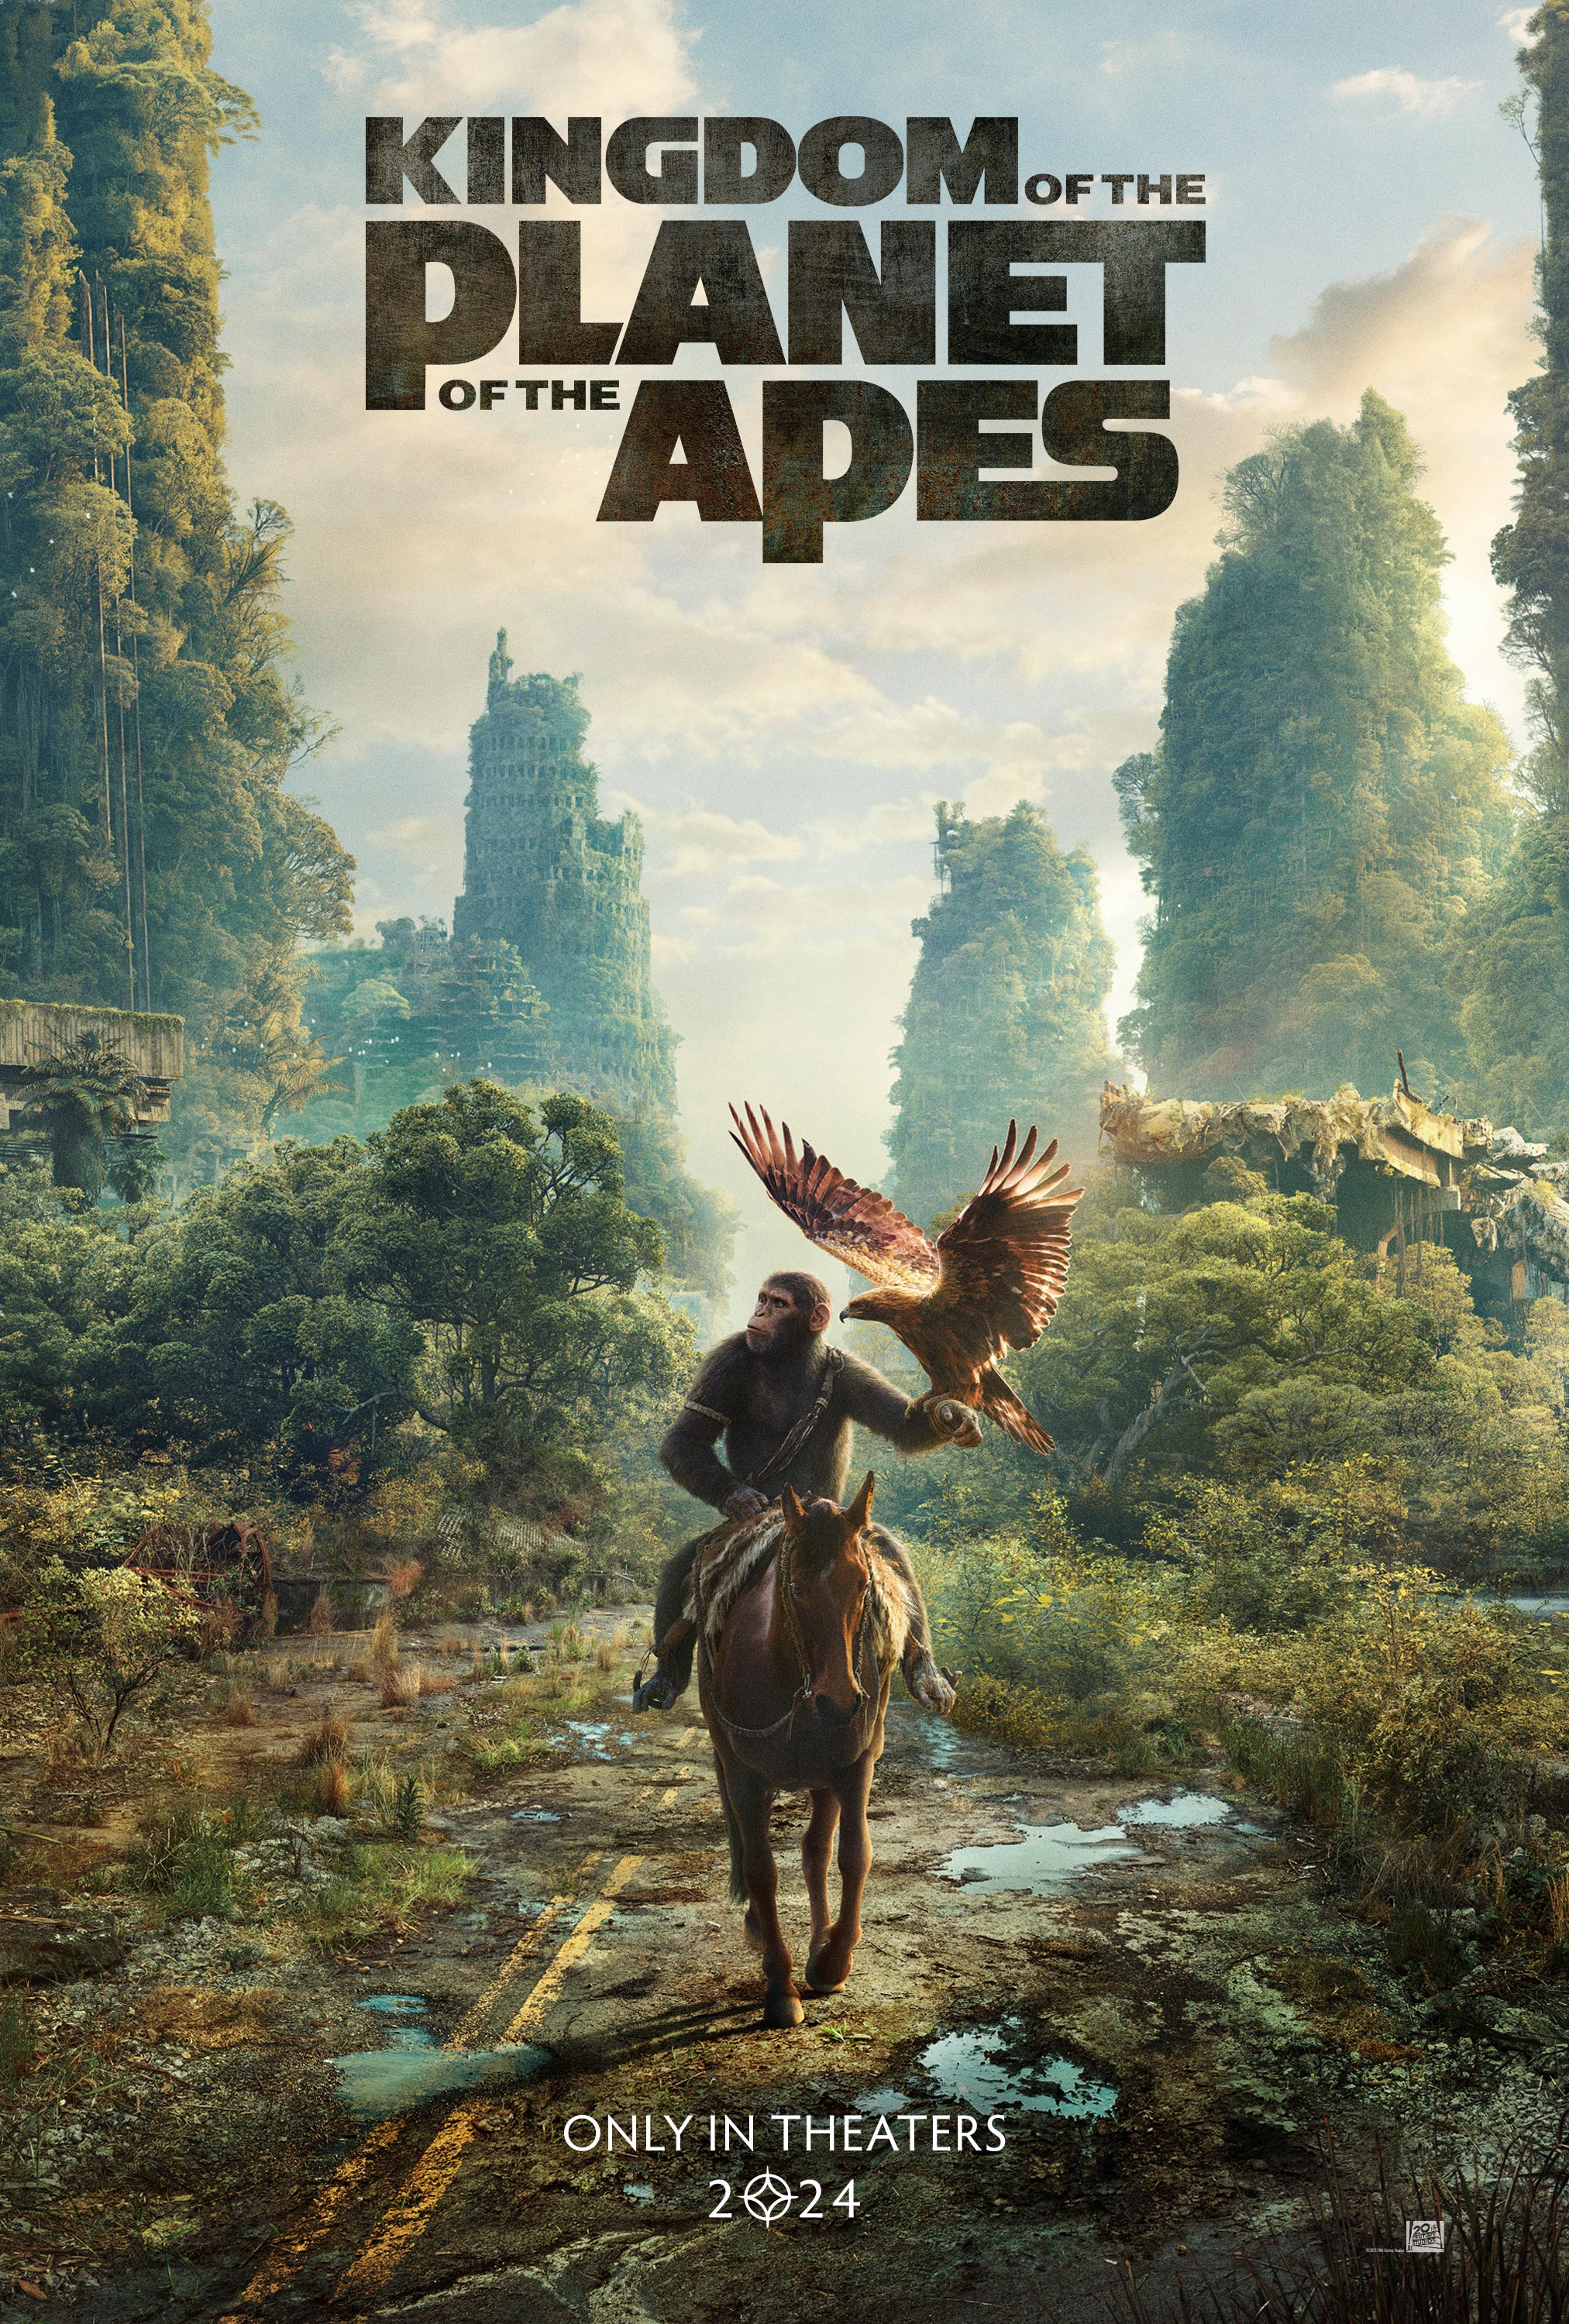 Kingdom of the Planet of the Apes Early Access Screening